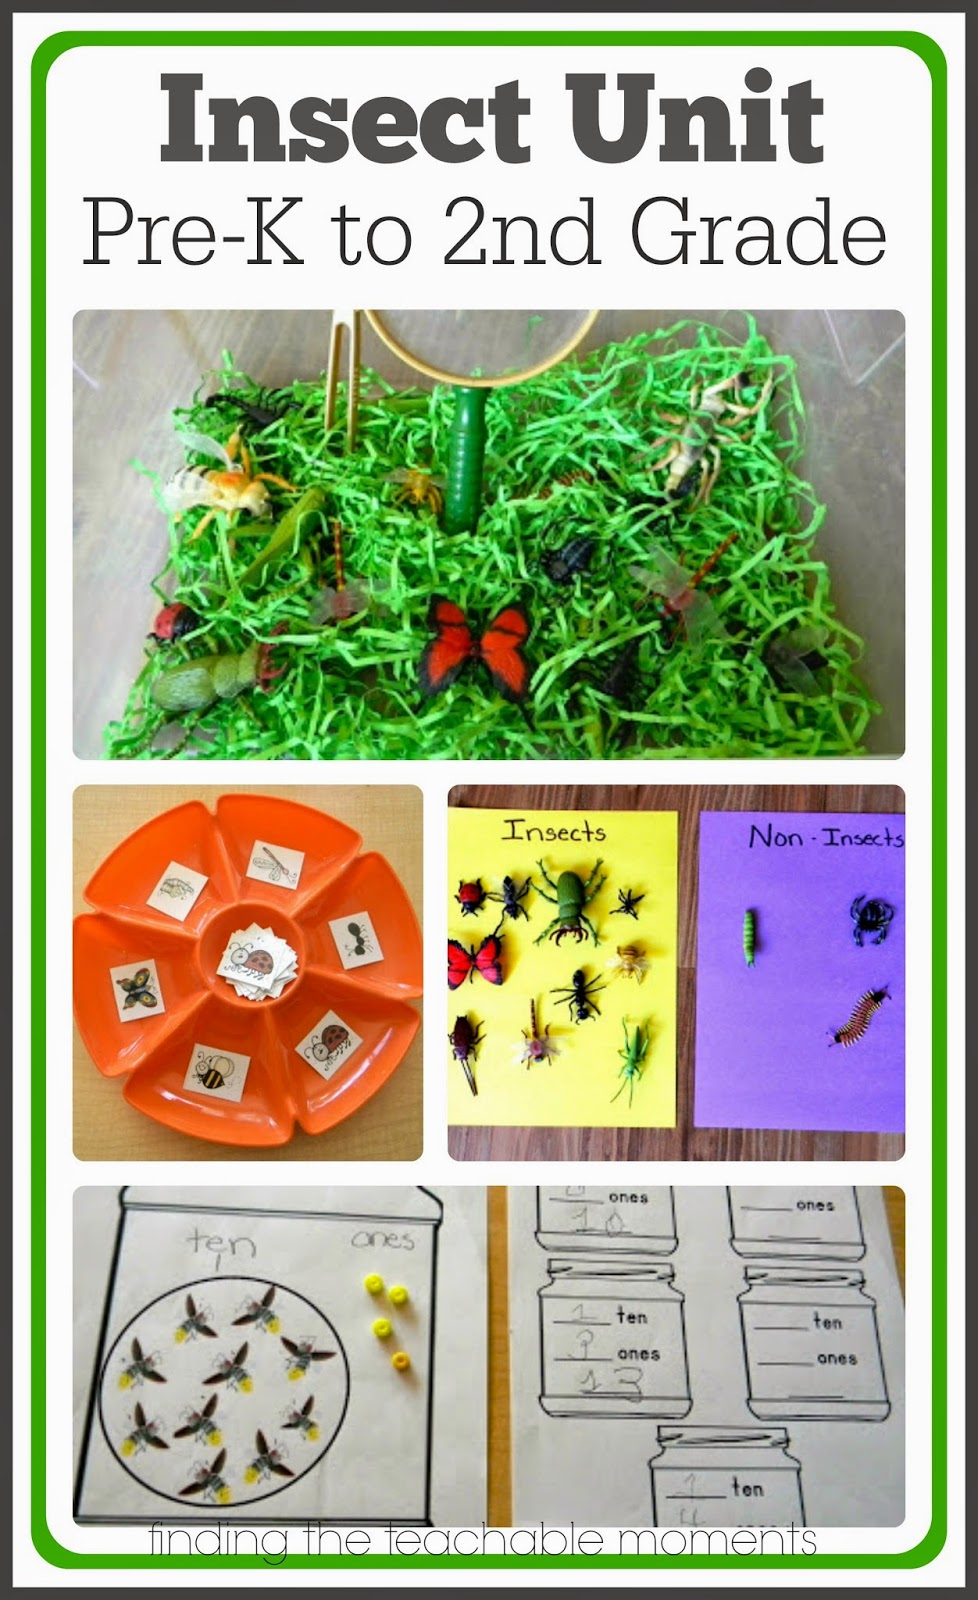 Insect Unit | Insect unit, Insects preschool, Preschool science